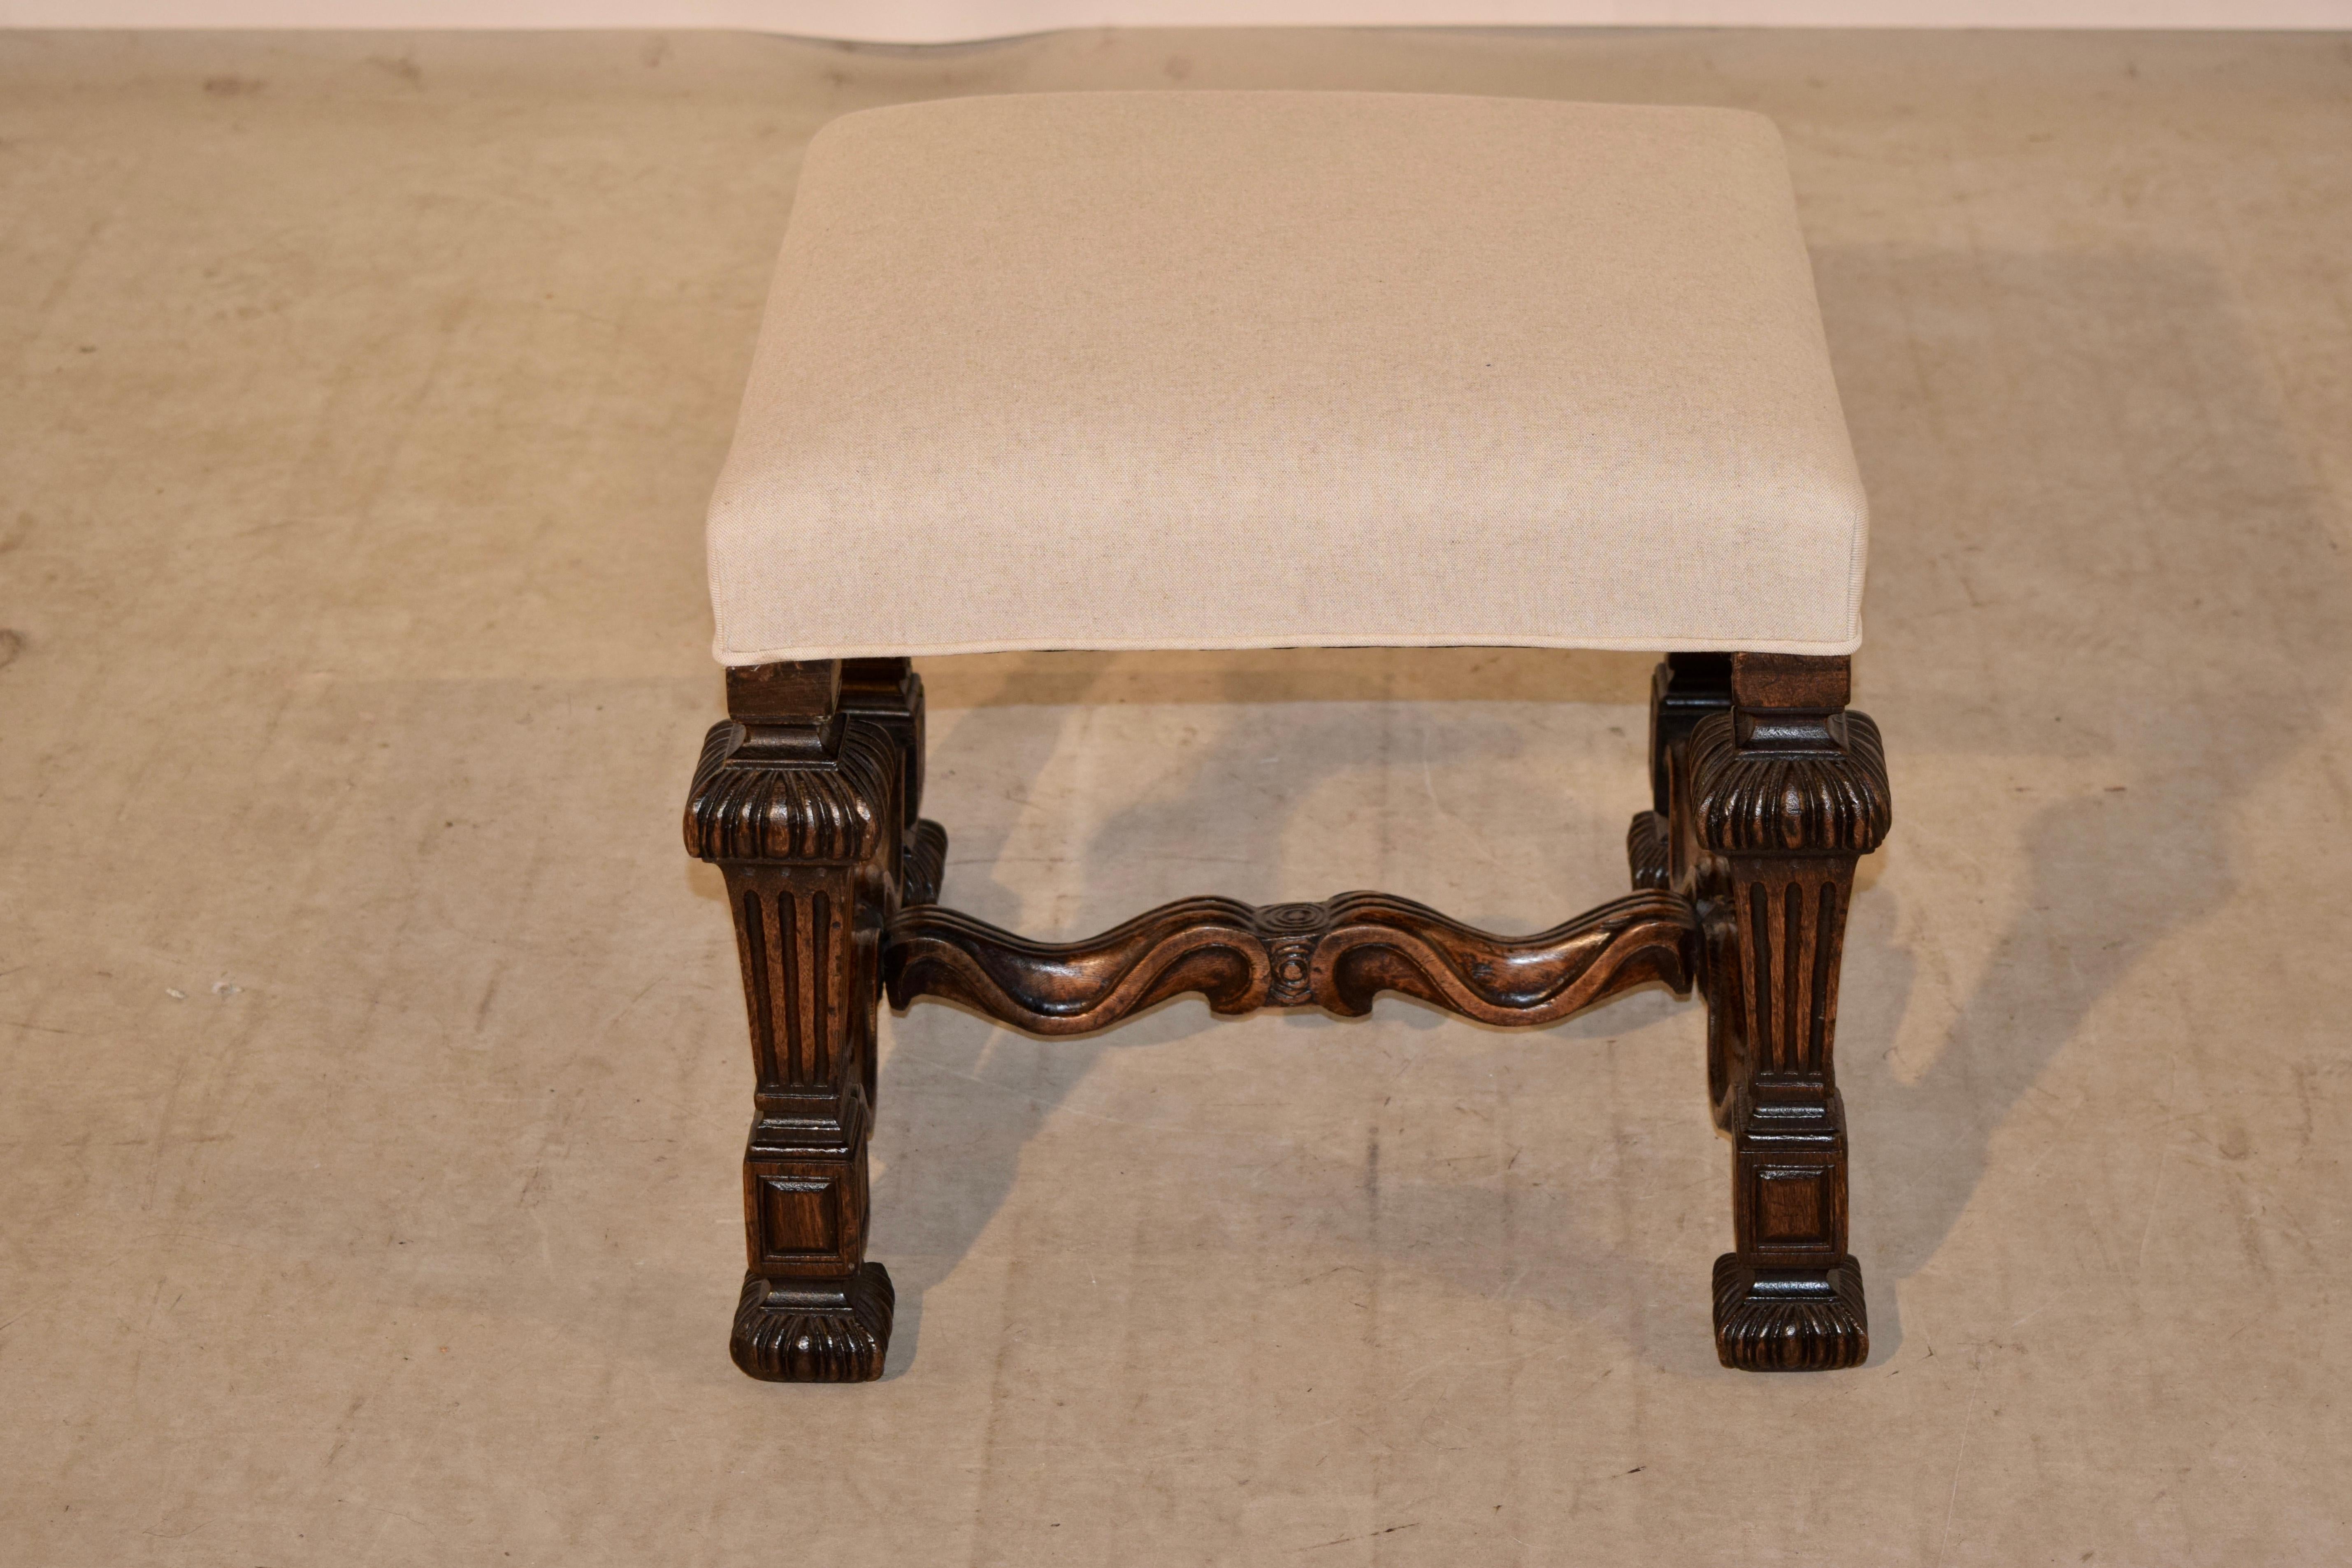 19th century walnut stool from France with a newly upholstered top in linen. The legs are highly carved in a reeded and fluted patterns, joined by scalloped and shaped stretchers.